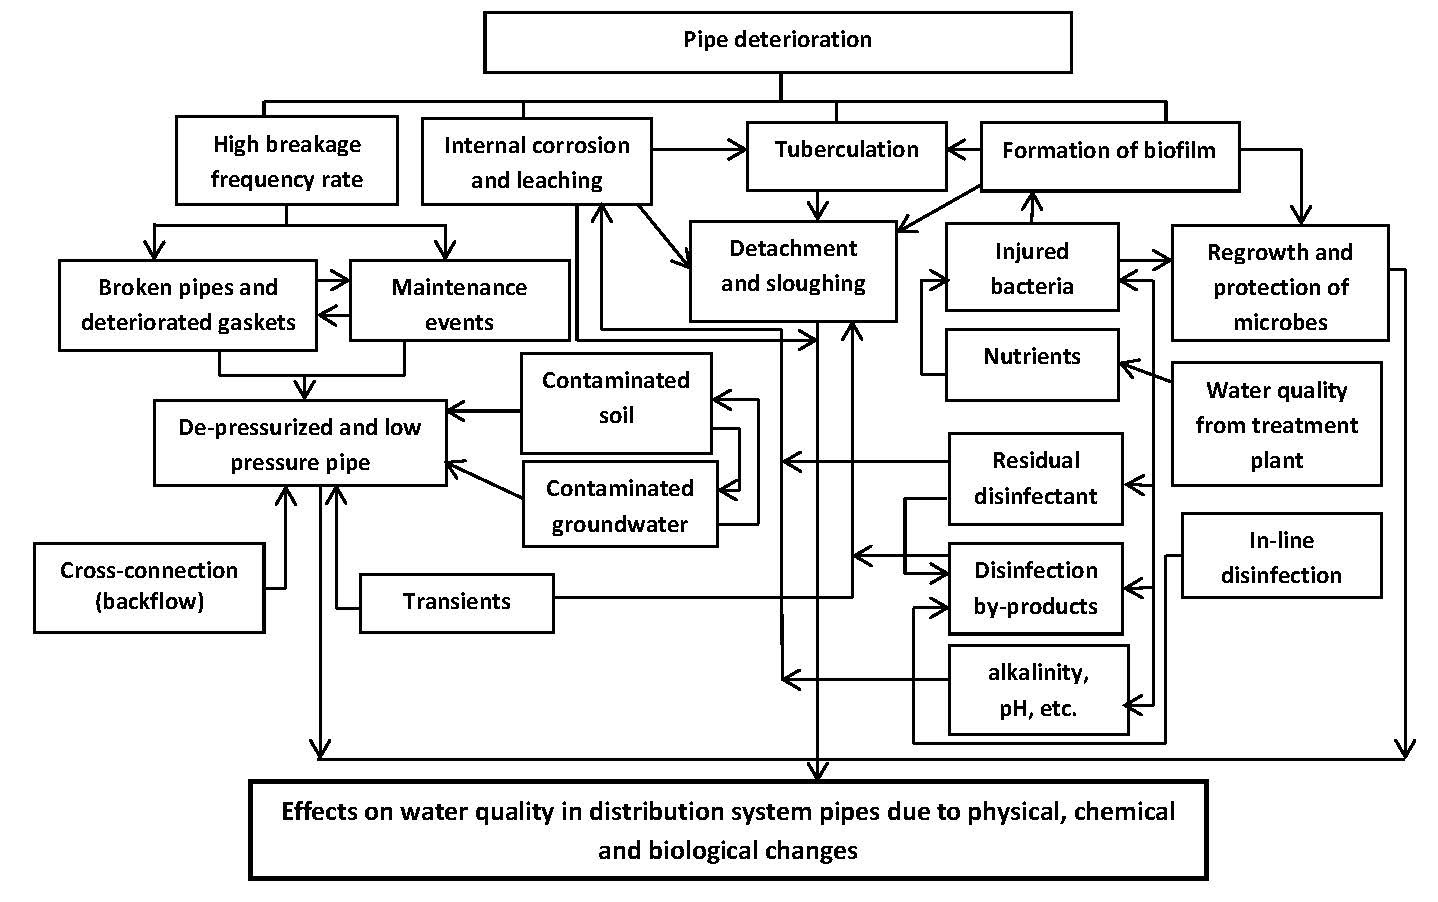 Figure 4. Factors contributing to deterioration of water quality in the drinking water distribution system